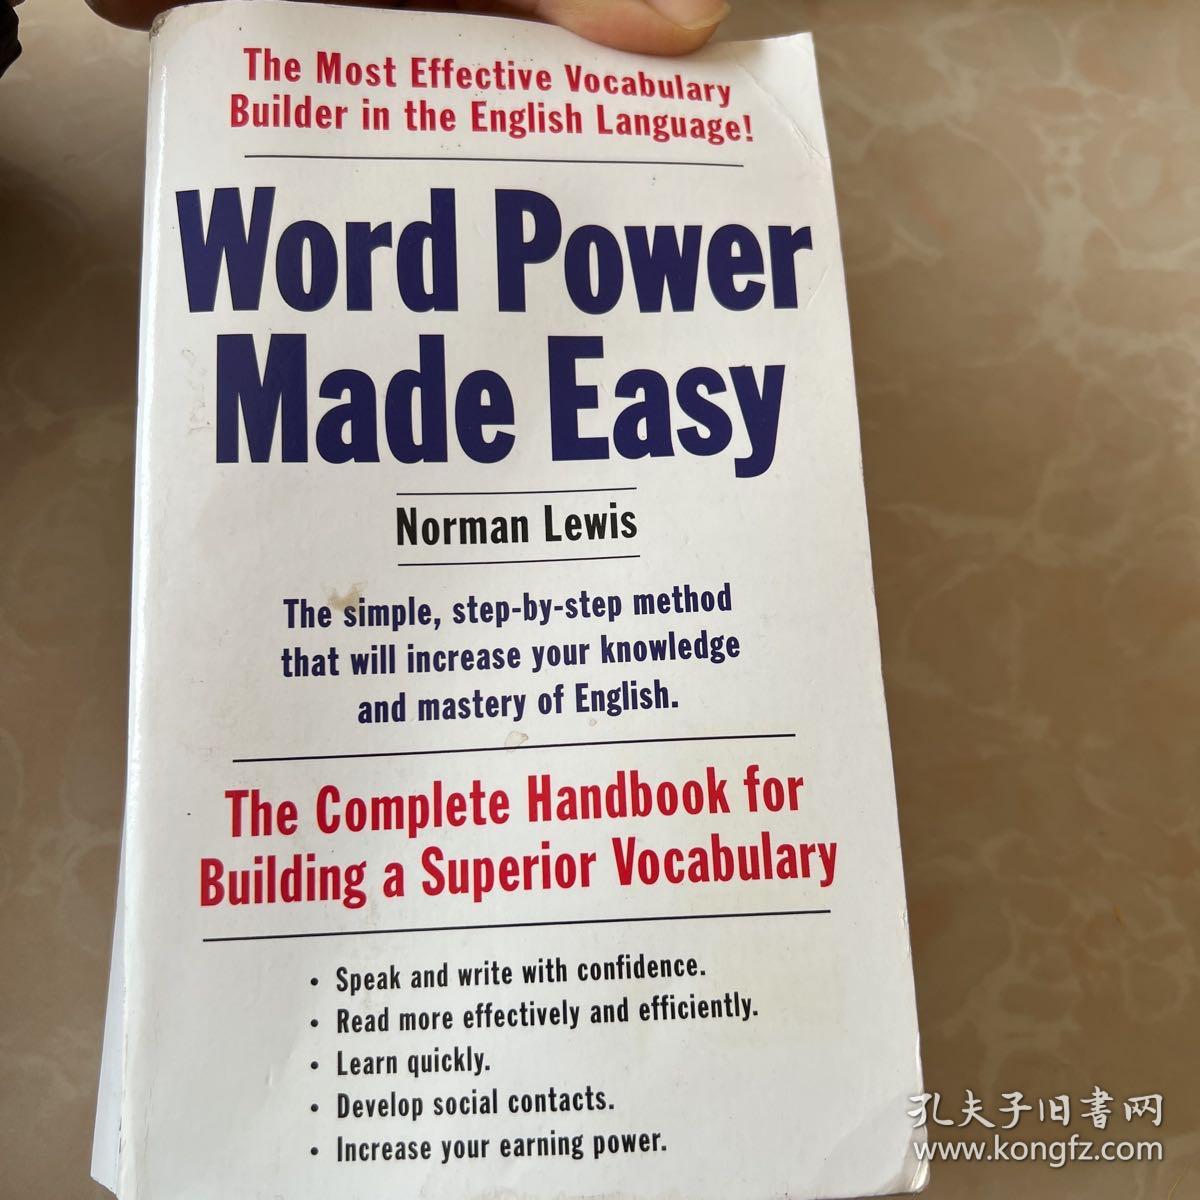 Word Power Made Easy:
The Complete Handbook for Building a Superior Vocabulary